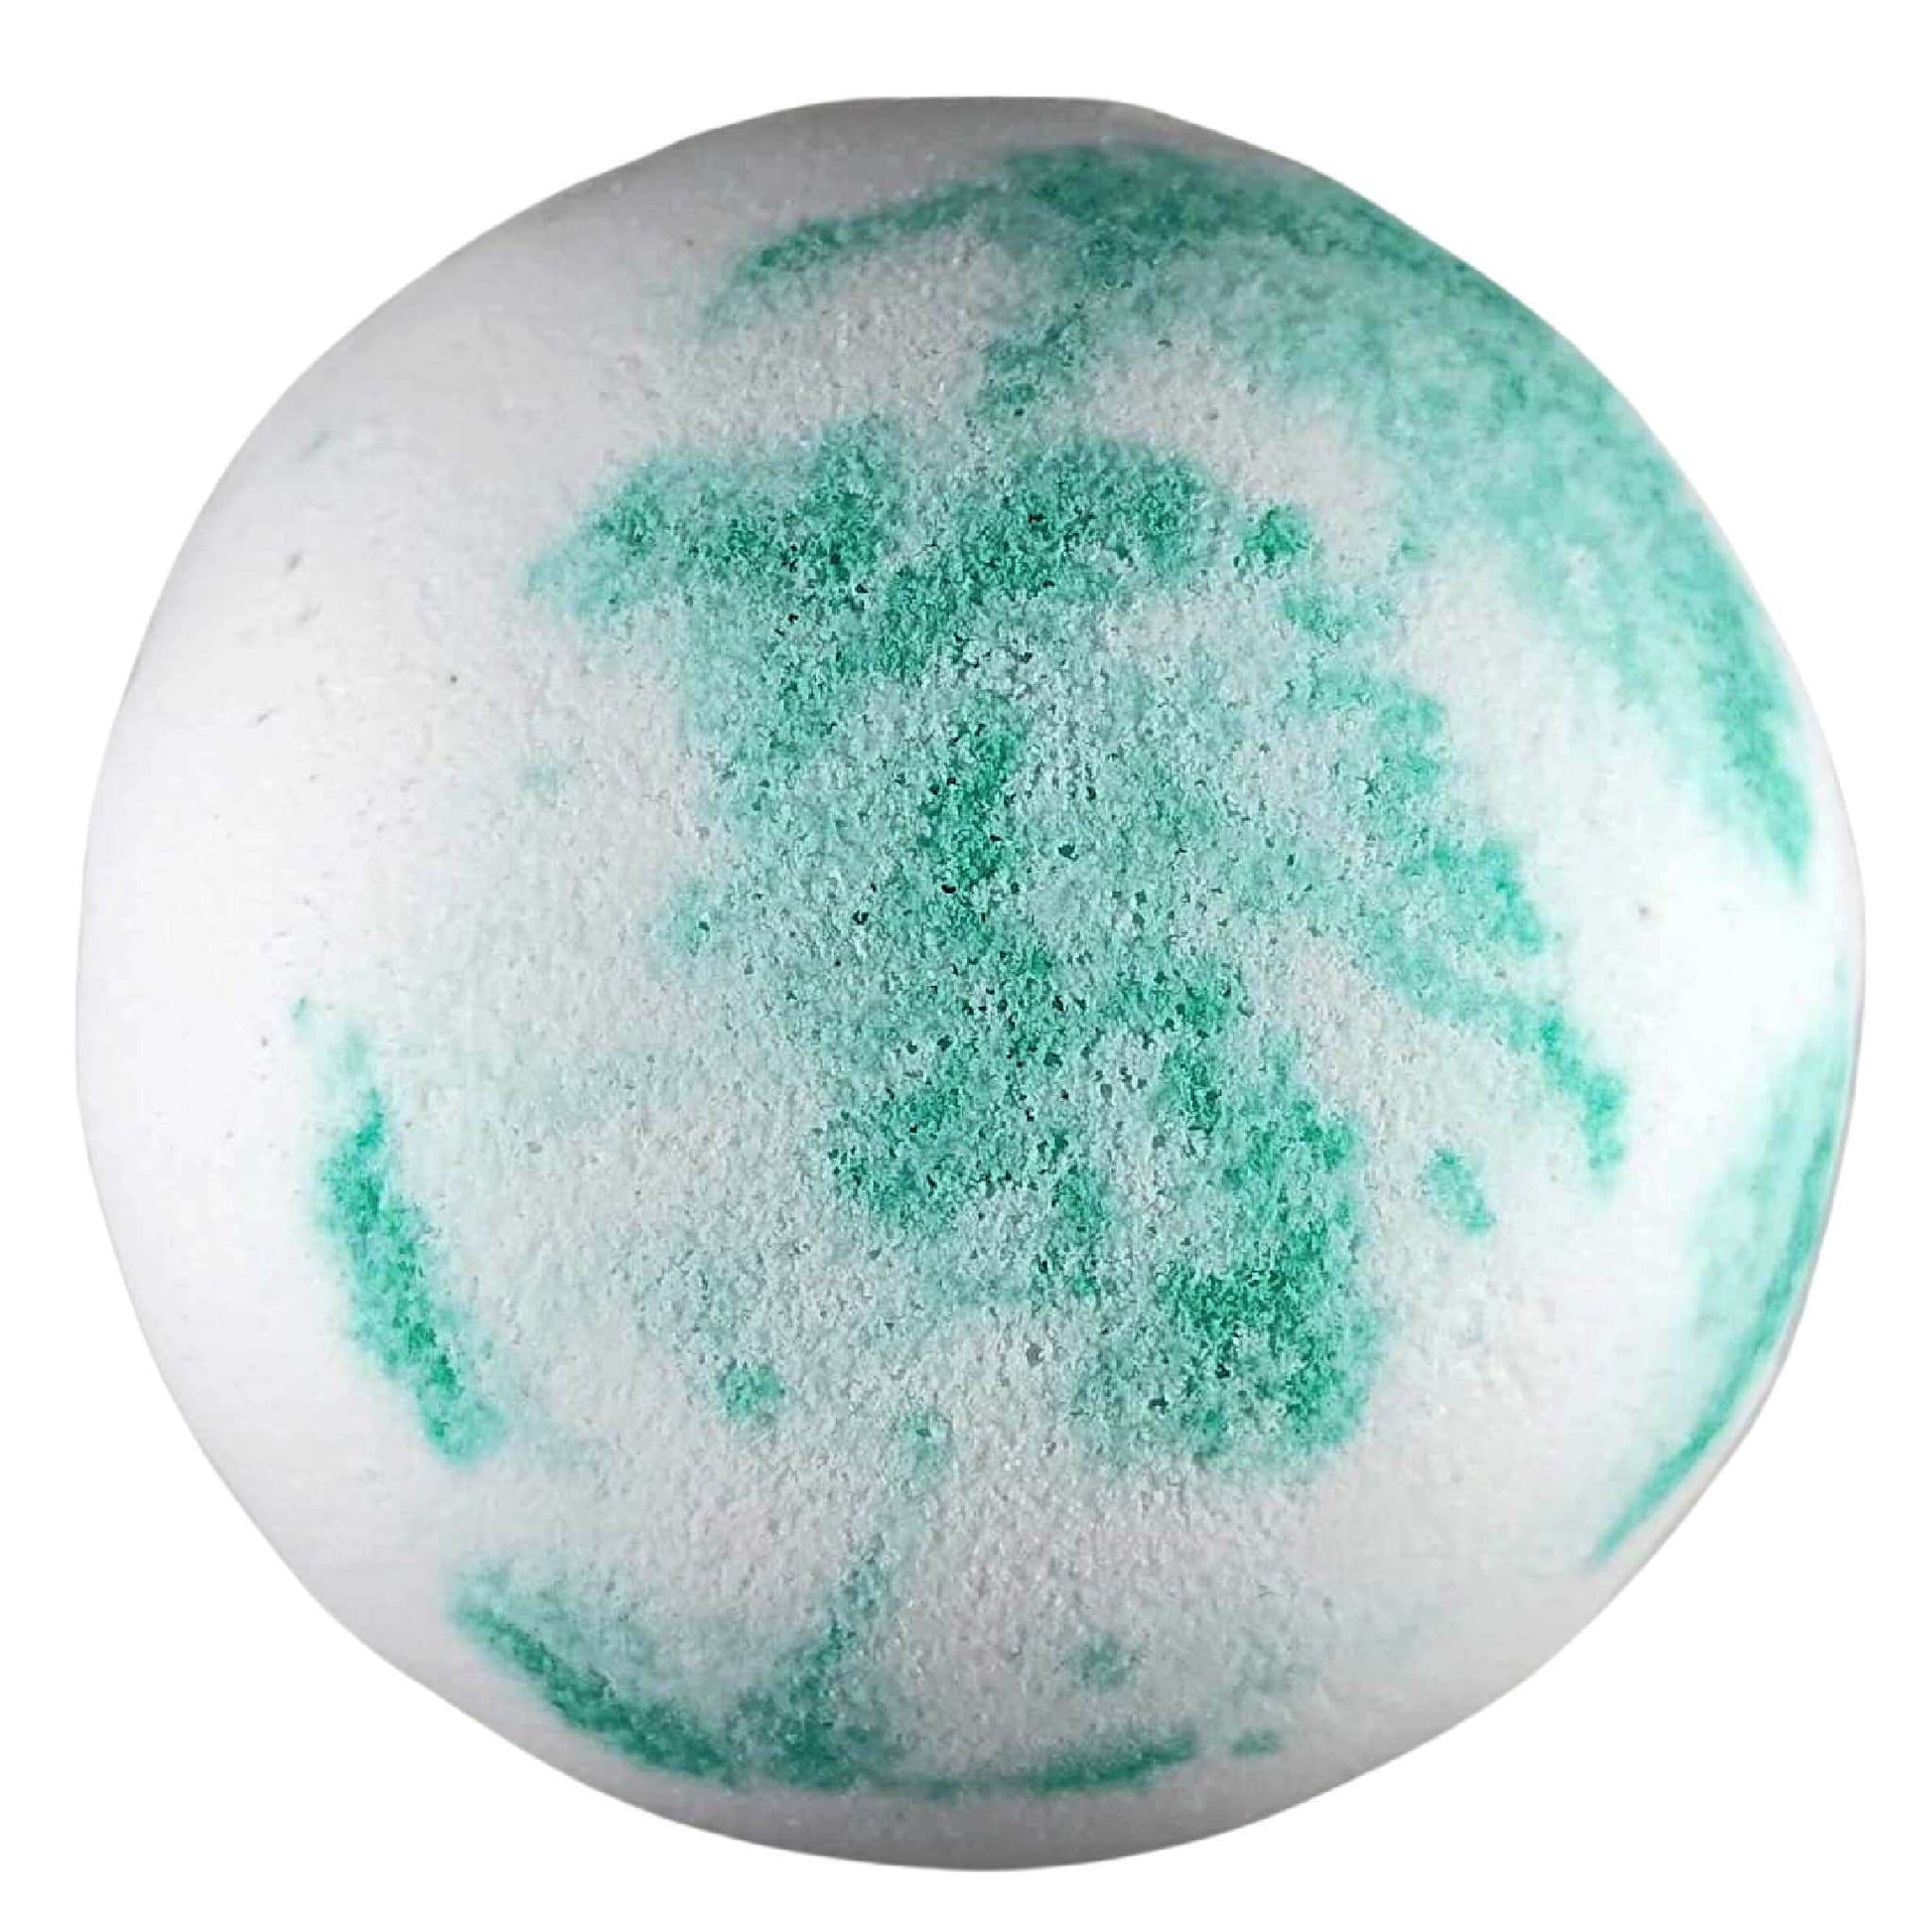 Transform your bath into an ocean of tranquility with our Sea Minerals Aromatherapy Bath Bomb!